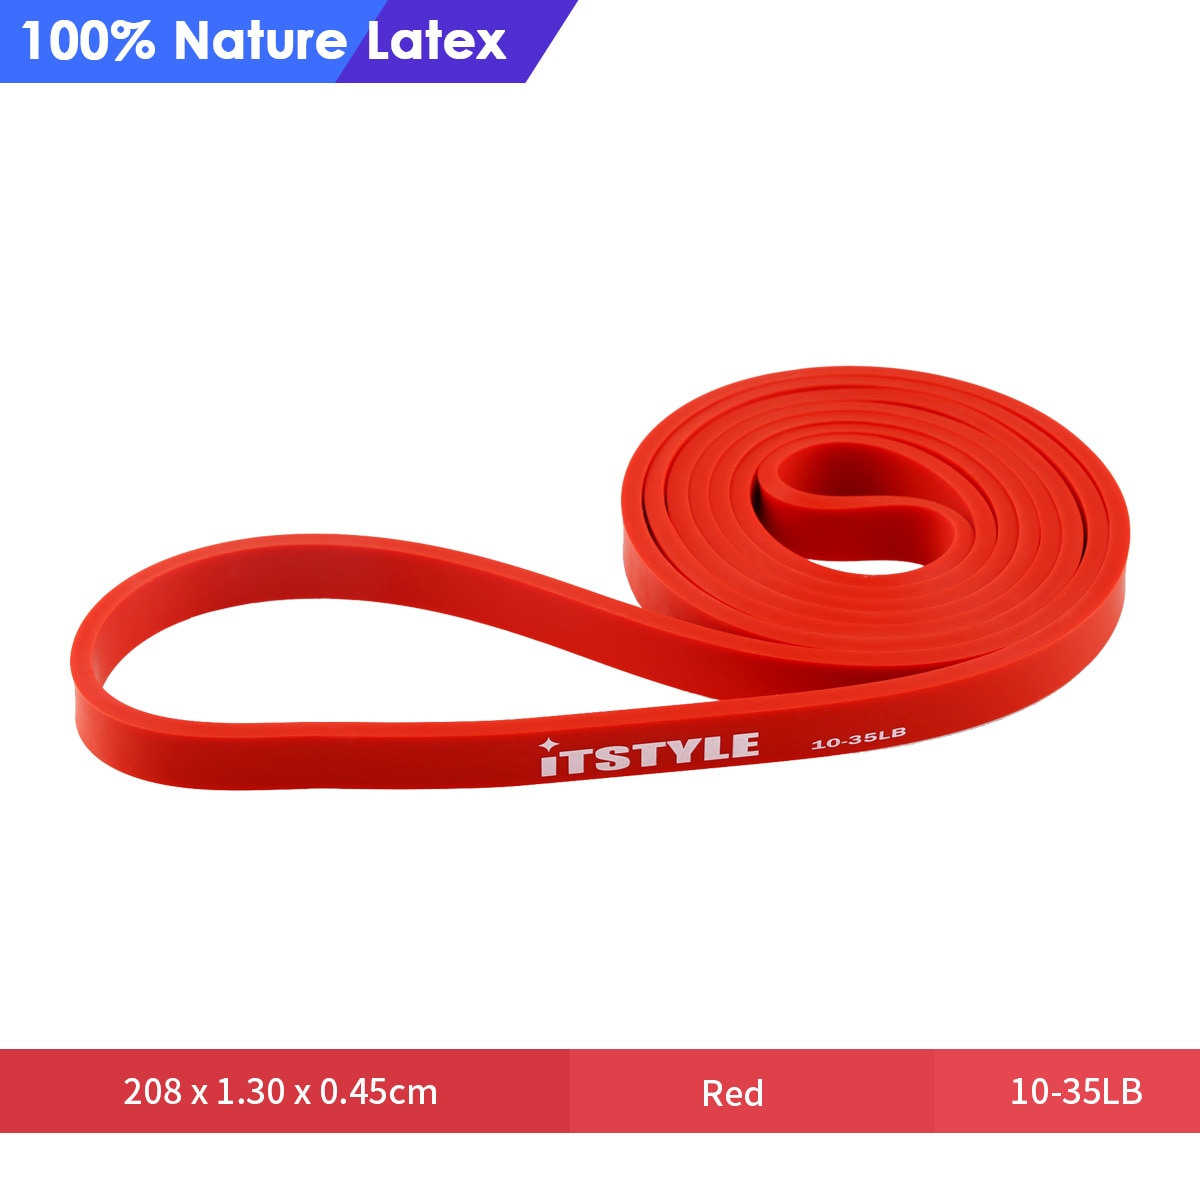 41&quot; Fitness Resistance Bands Natural Latex Power rubber Expander gym training workout Yoga elastic Rubber band